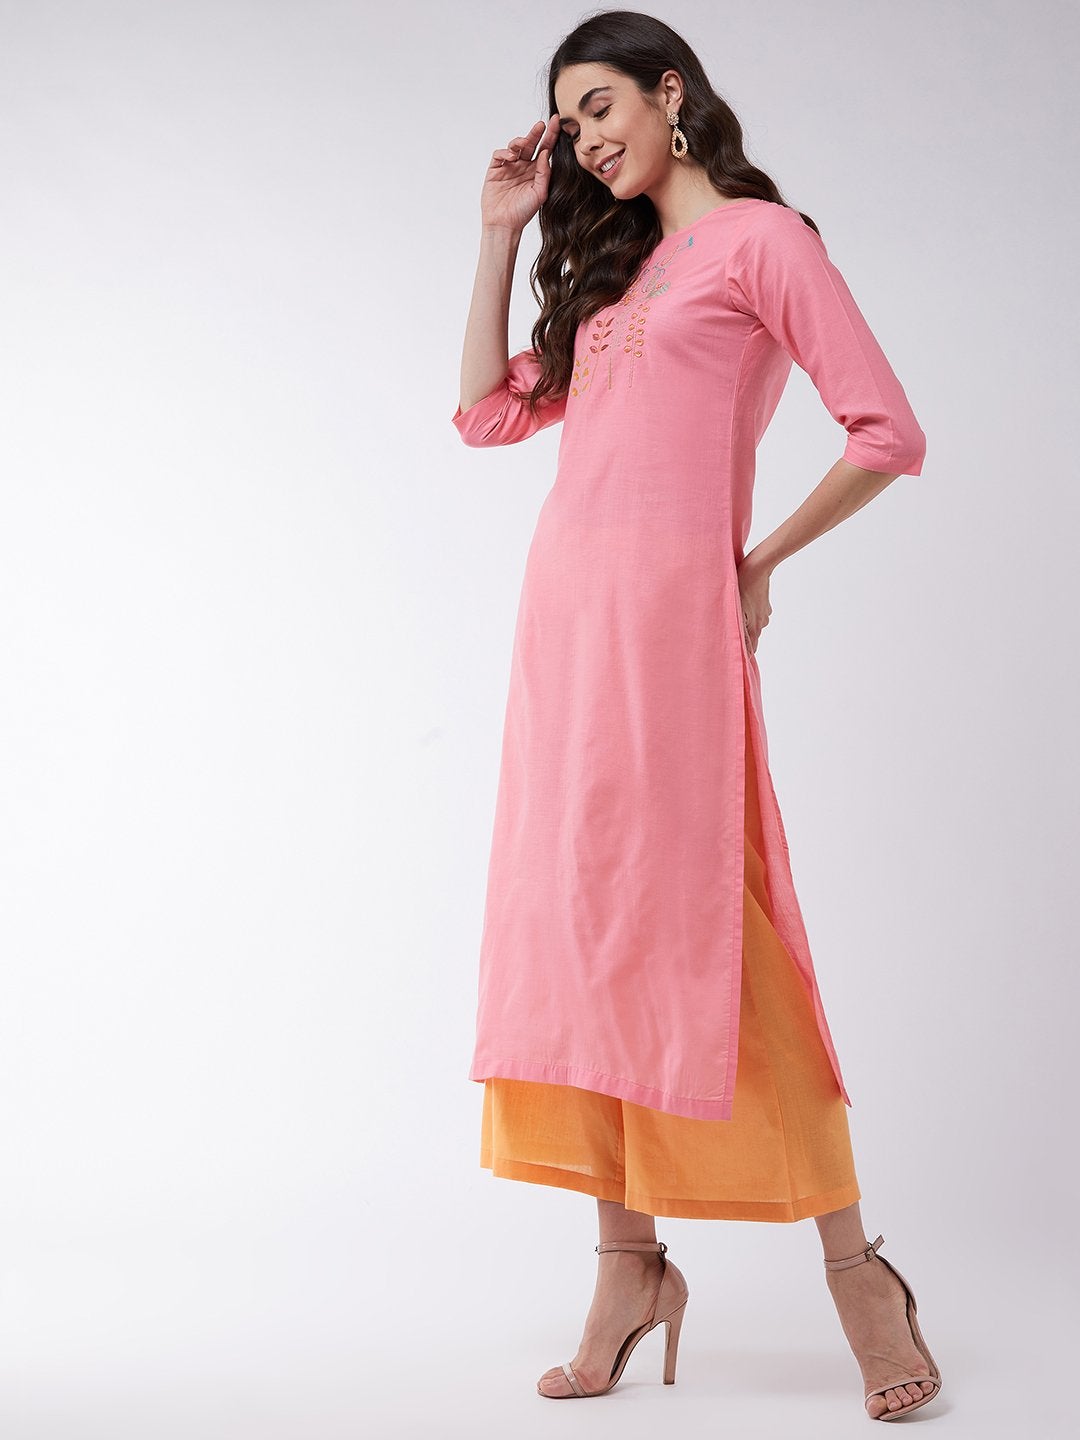 Women's Pink Embroidered Quarter Sleeves Kurta With Pants - Pannkh